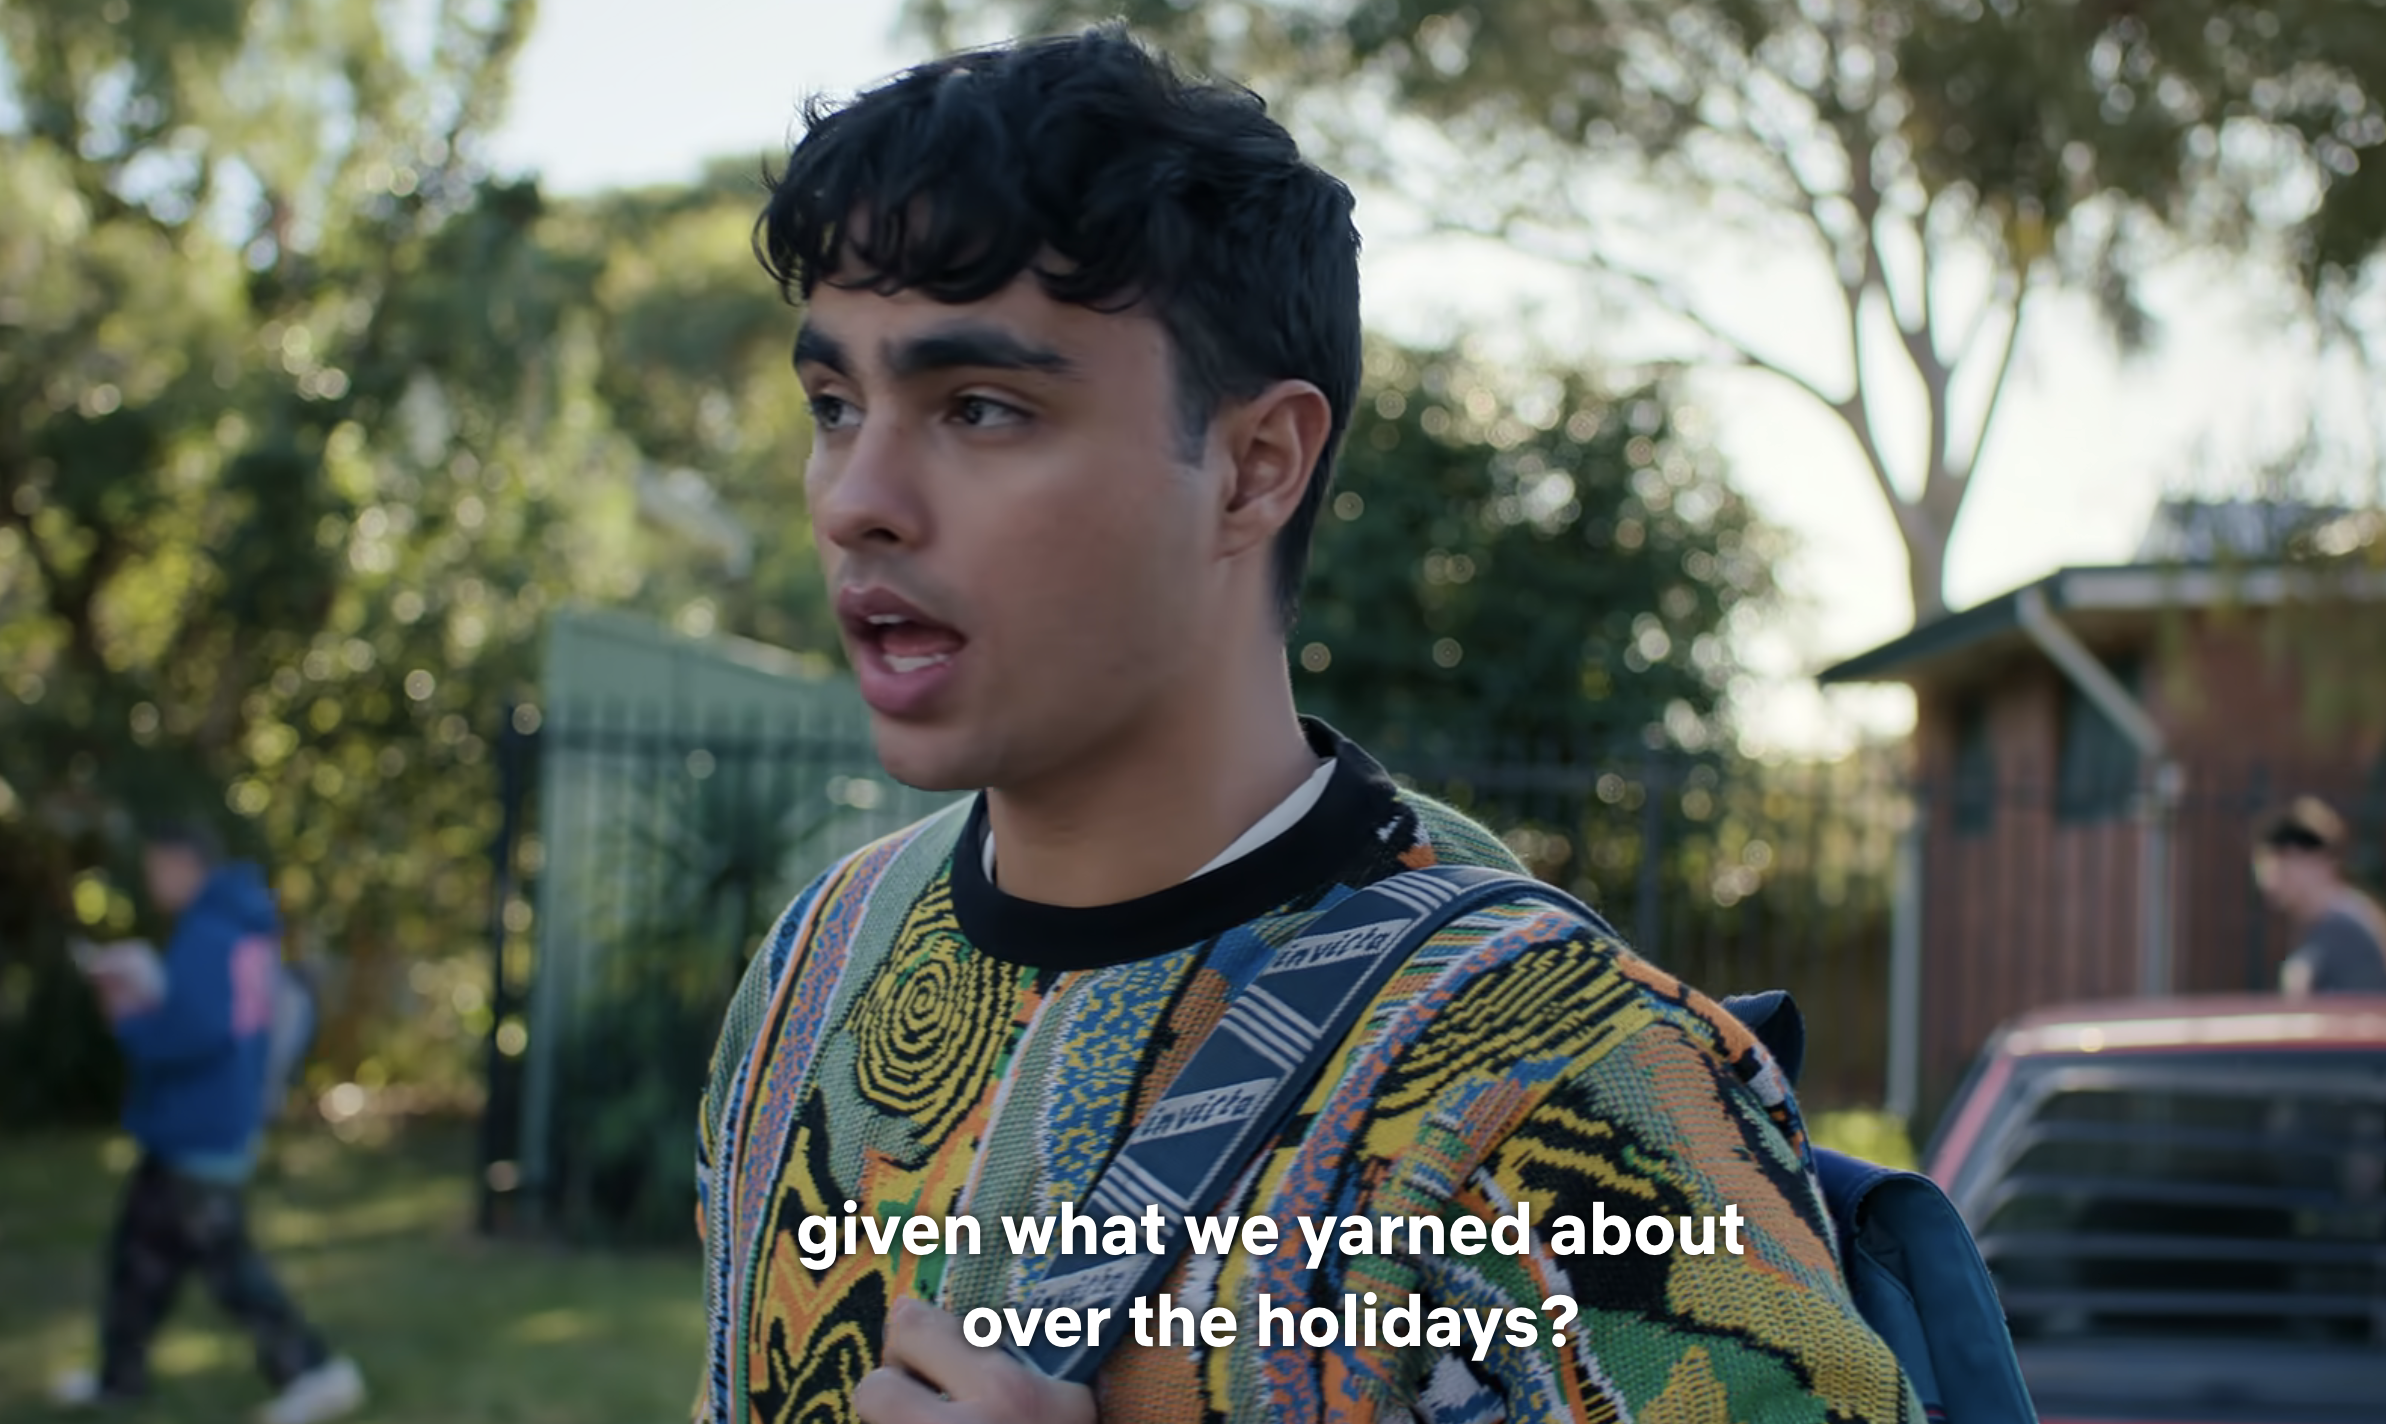 Young man with a concerned expression wearing a patterned sweater outside. Subtitles on screen